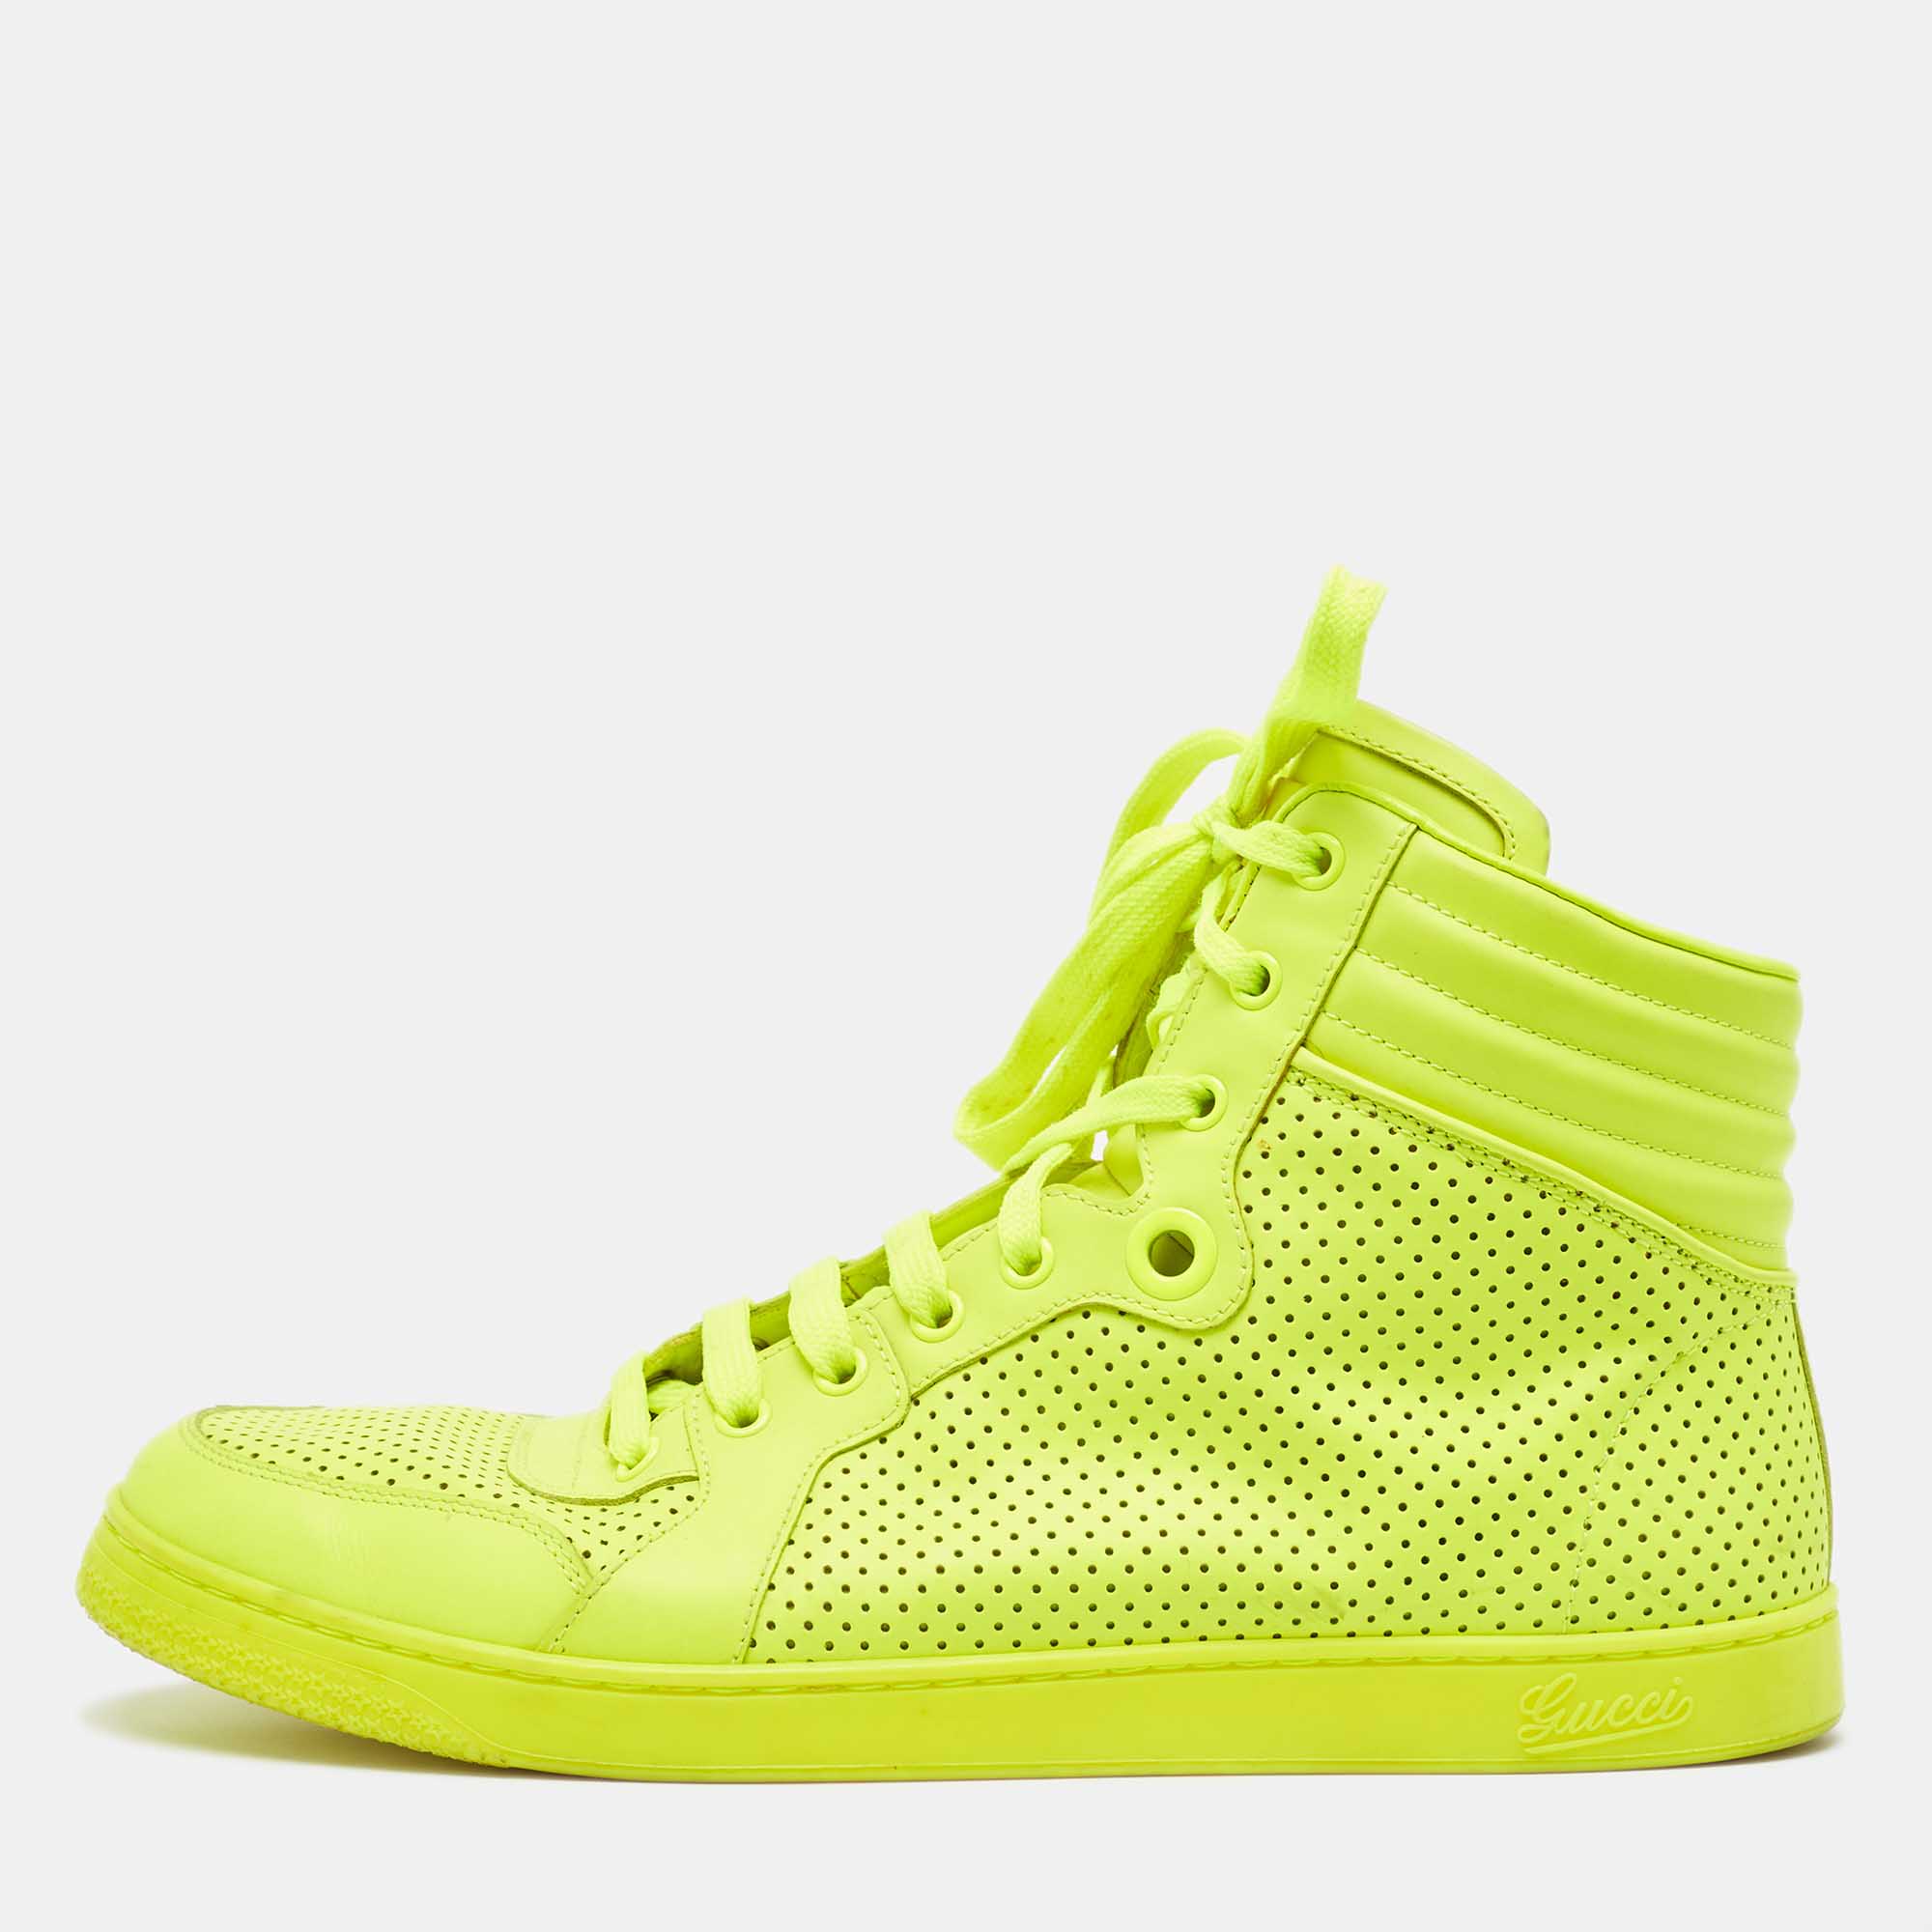 Pre-owned Gucci Neon Green Perforated Leather Lace Up High Top Sneakers Size 43